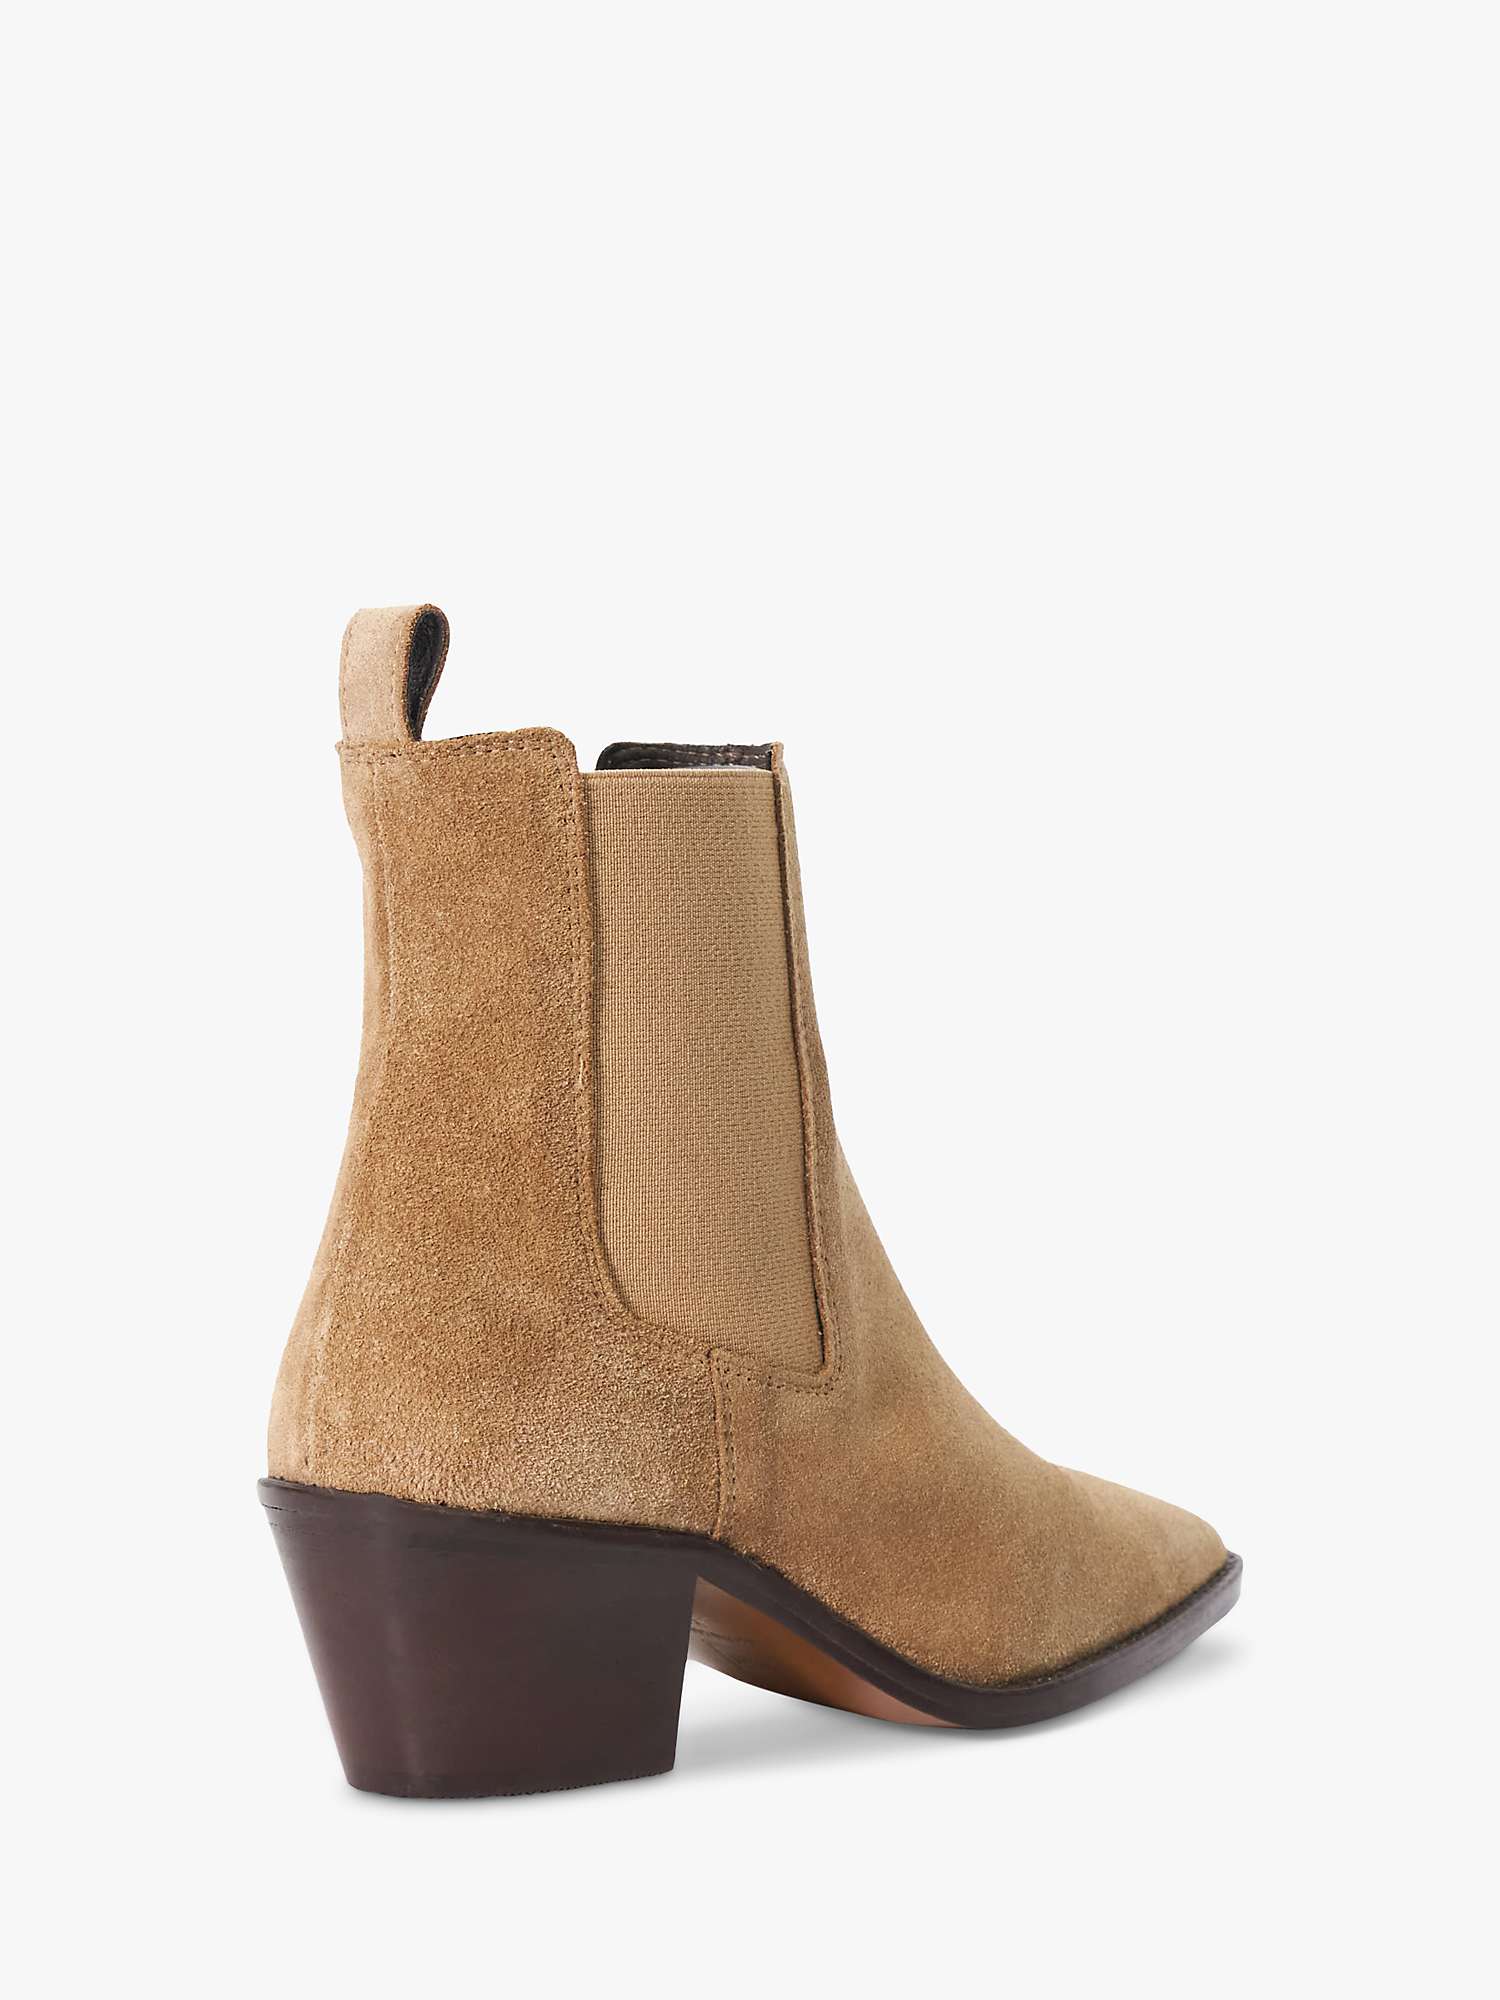 Buy Dune Pexas Suede Chelsea Boots, Sand Online at johnlewis.com